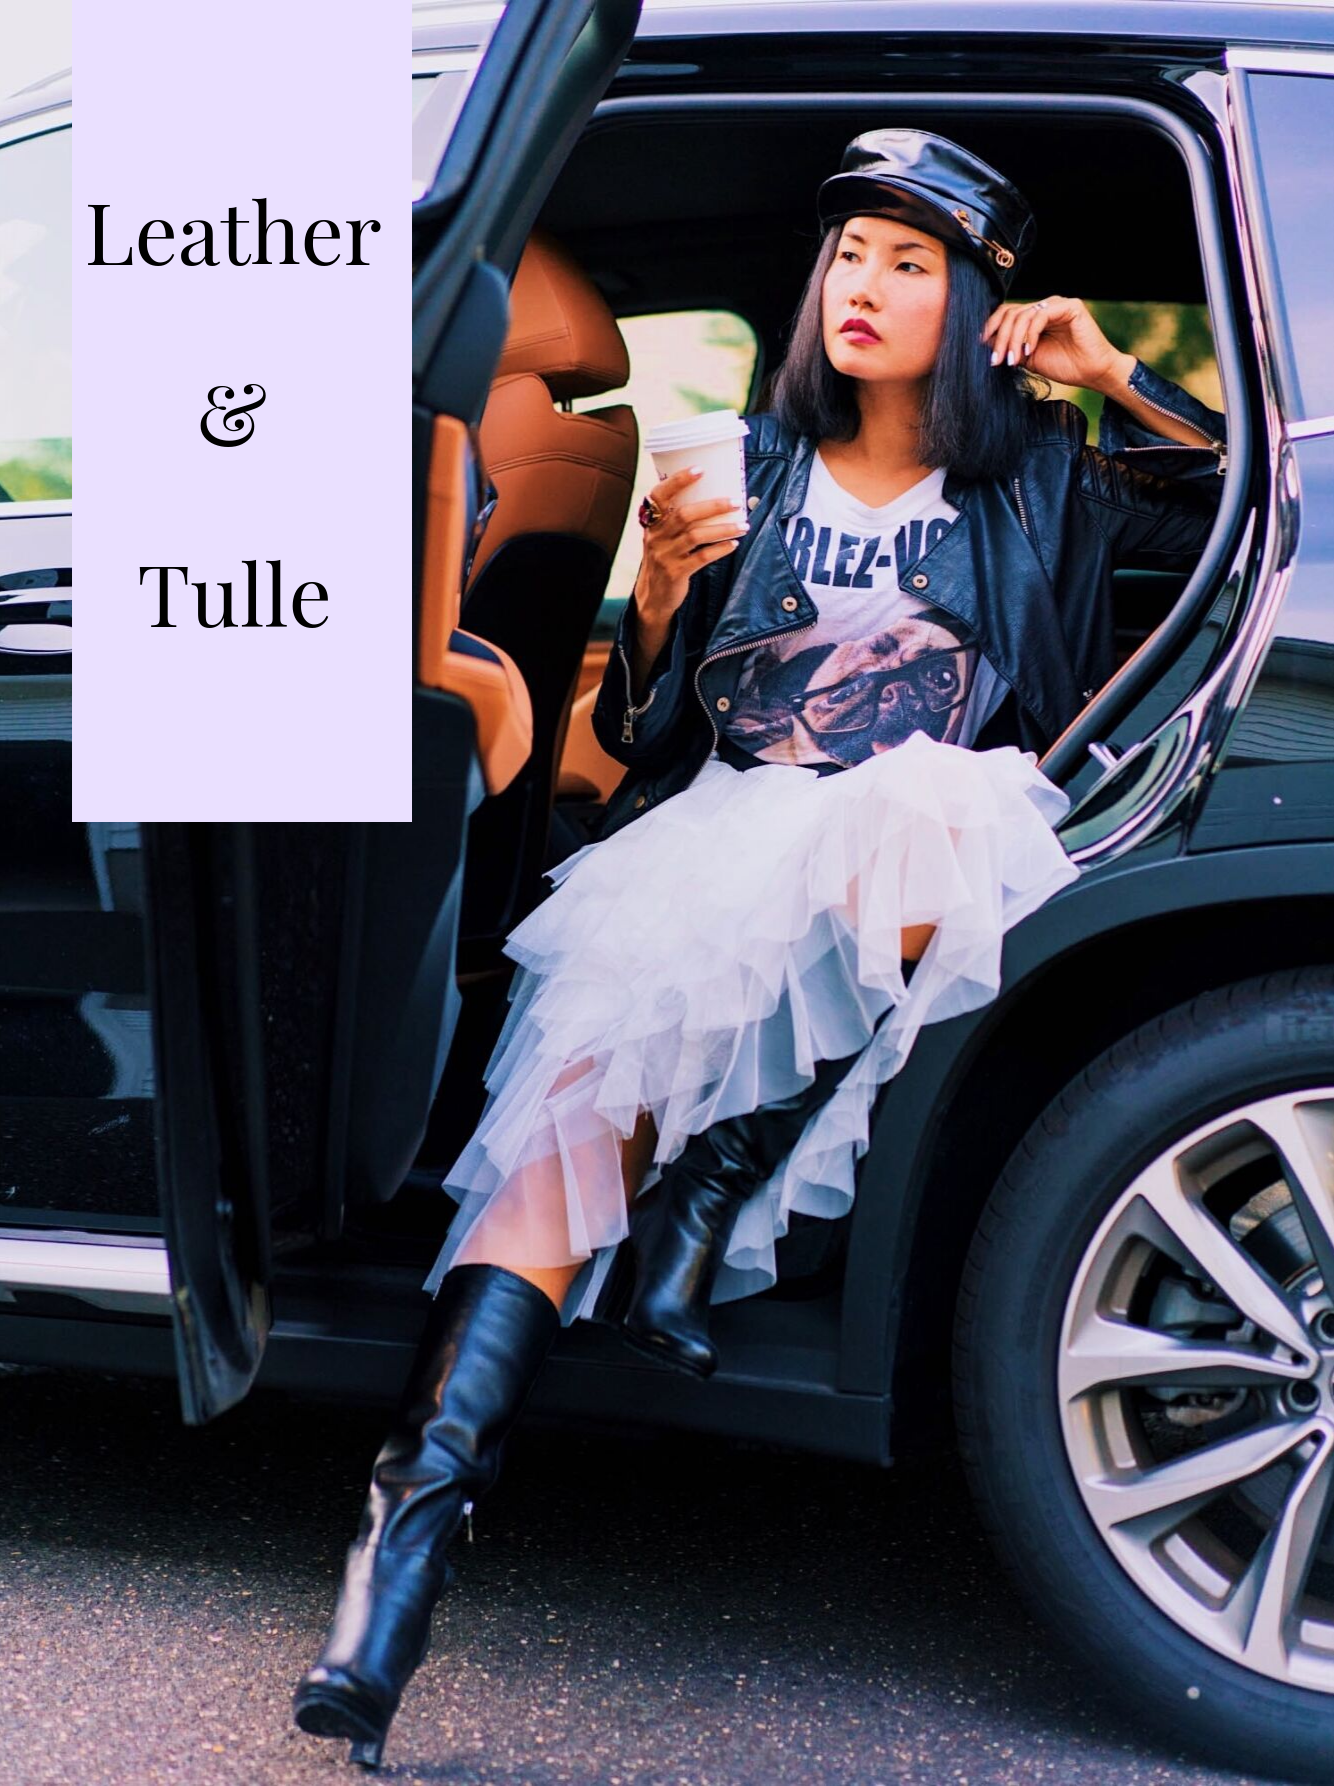 leather and tulle skirt for fall fashion